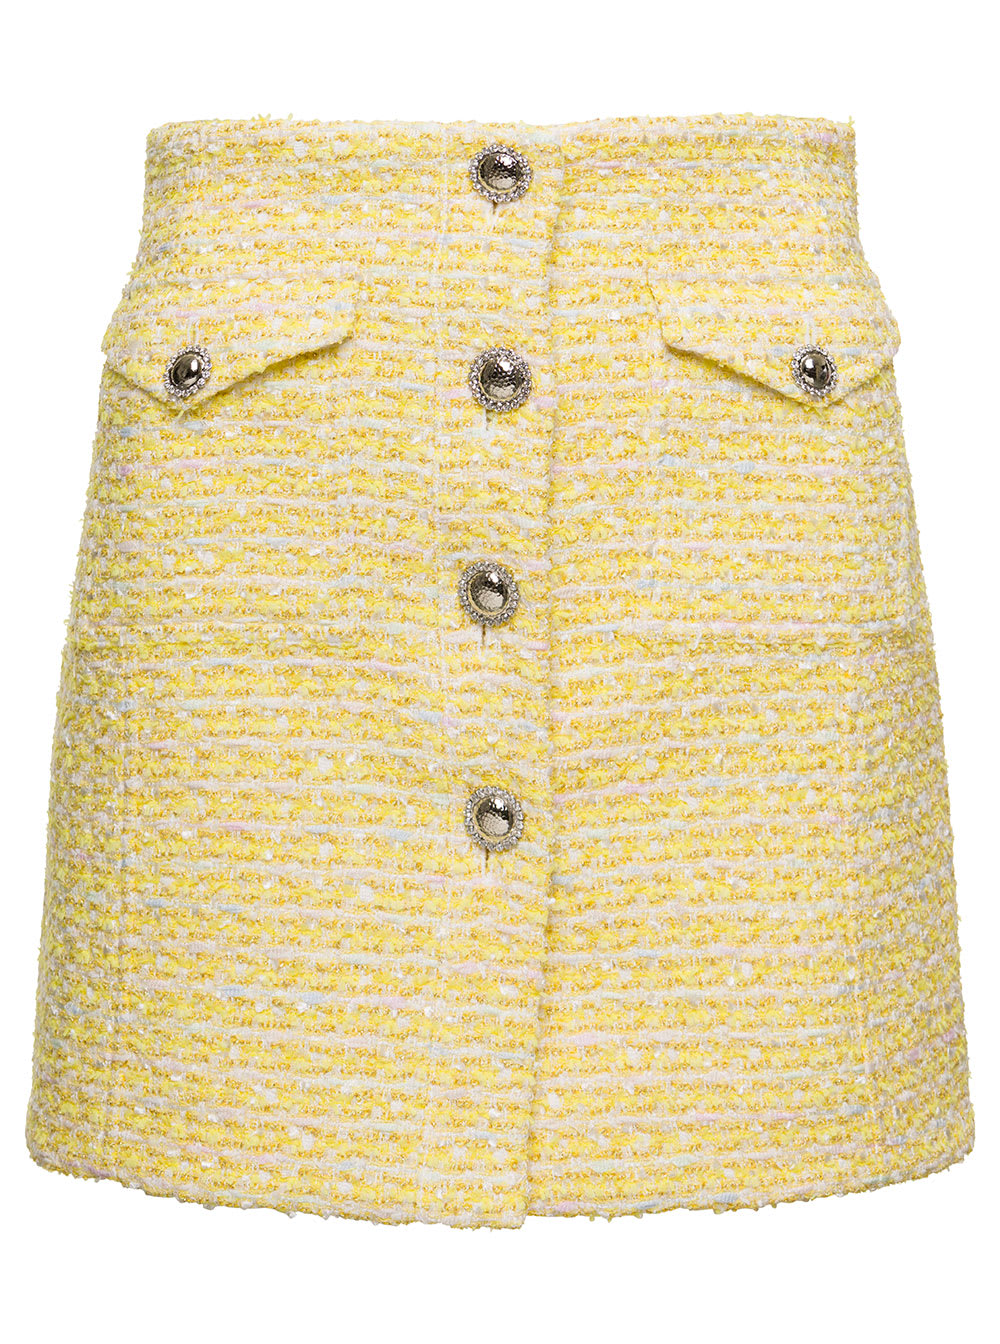 ALESSANDRA RICH YELLOW MINISKIRT WITH FRONT POCKETS AND SILVER BUTTONS ON THE FRONT IN TWEED LUREX WOMAN